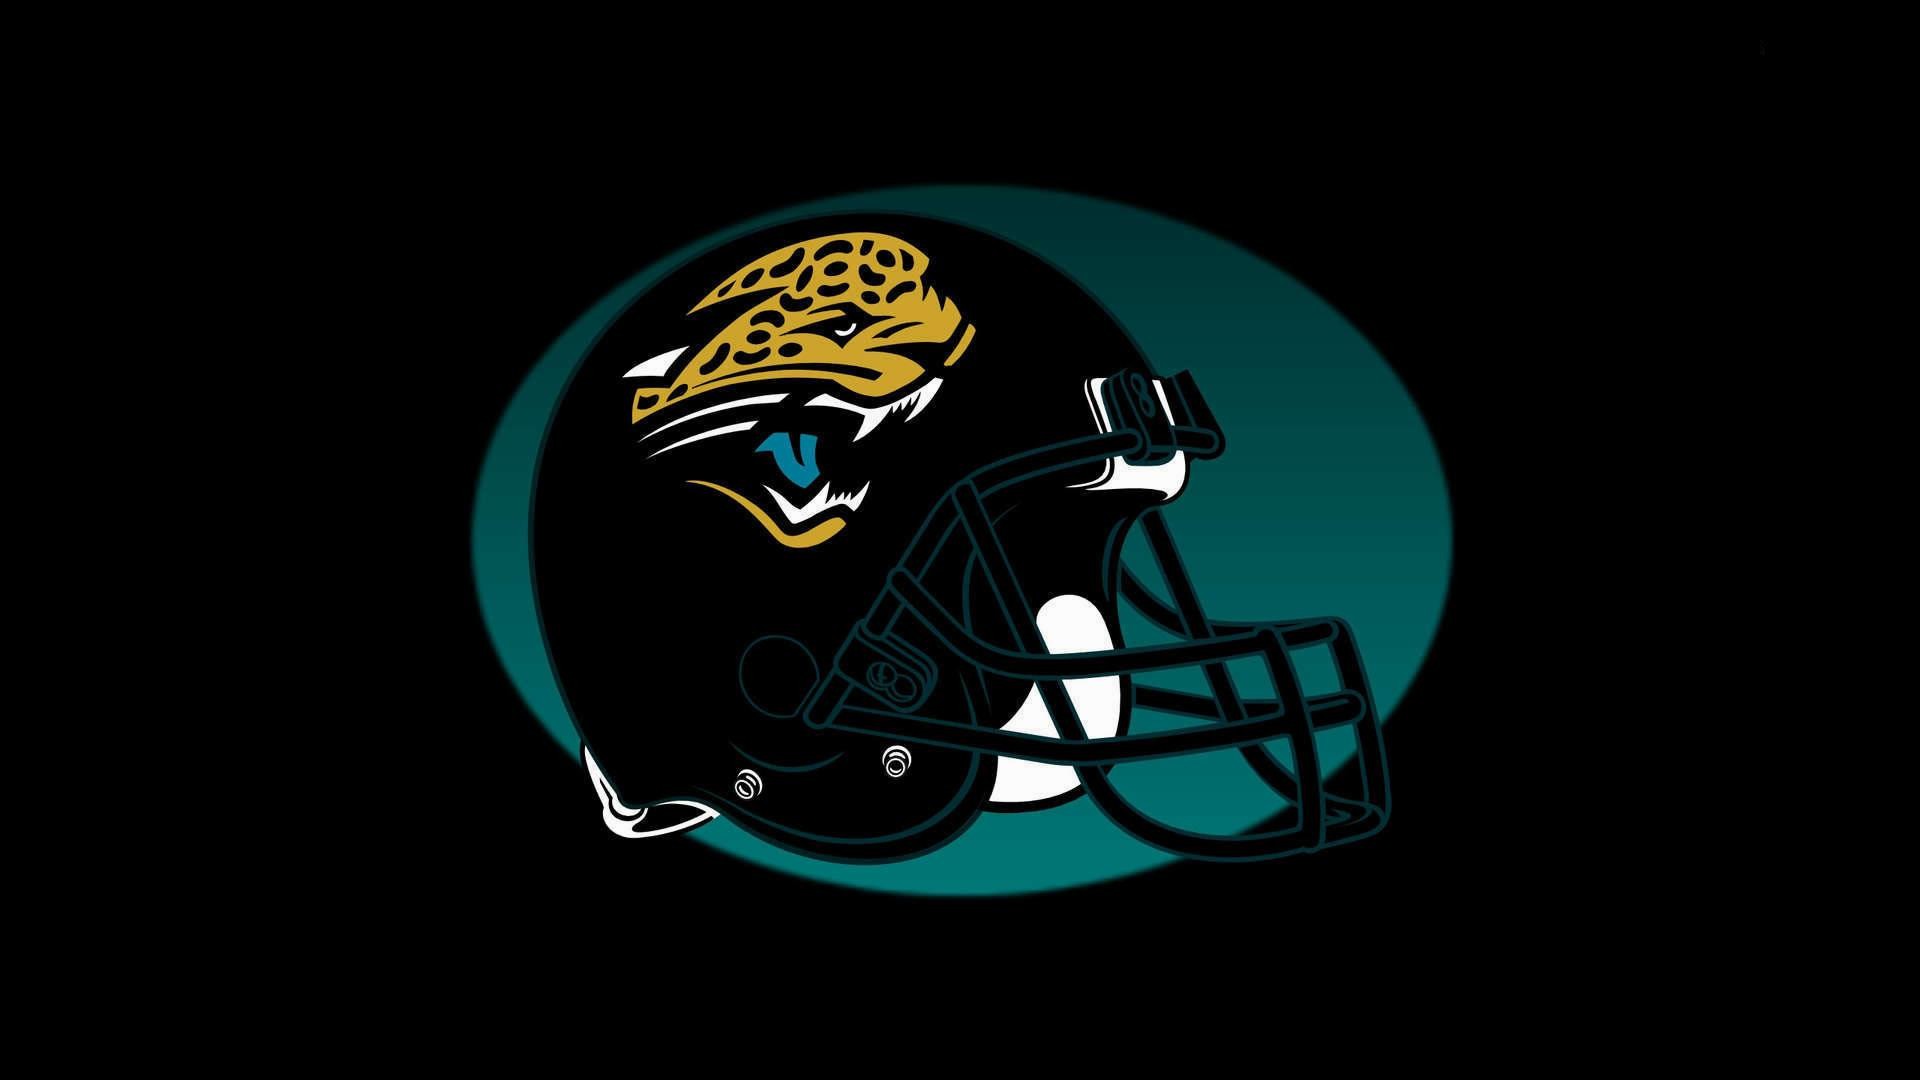 Wallpaper Desktop Jacksonville Jaguars HD With Resolution 1920X1080 pixel. You can make this wallpaper for your Mac or Windows Desktop Background, iPhone, Android or Tablet and another Smartphone device for free